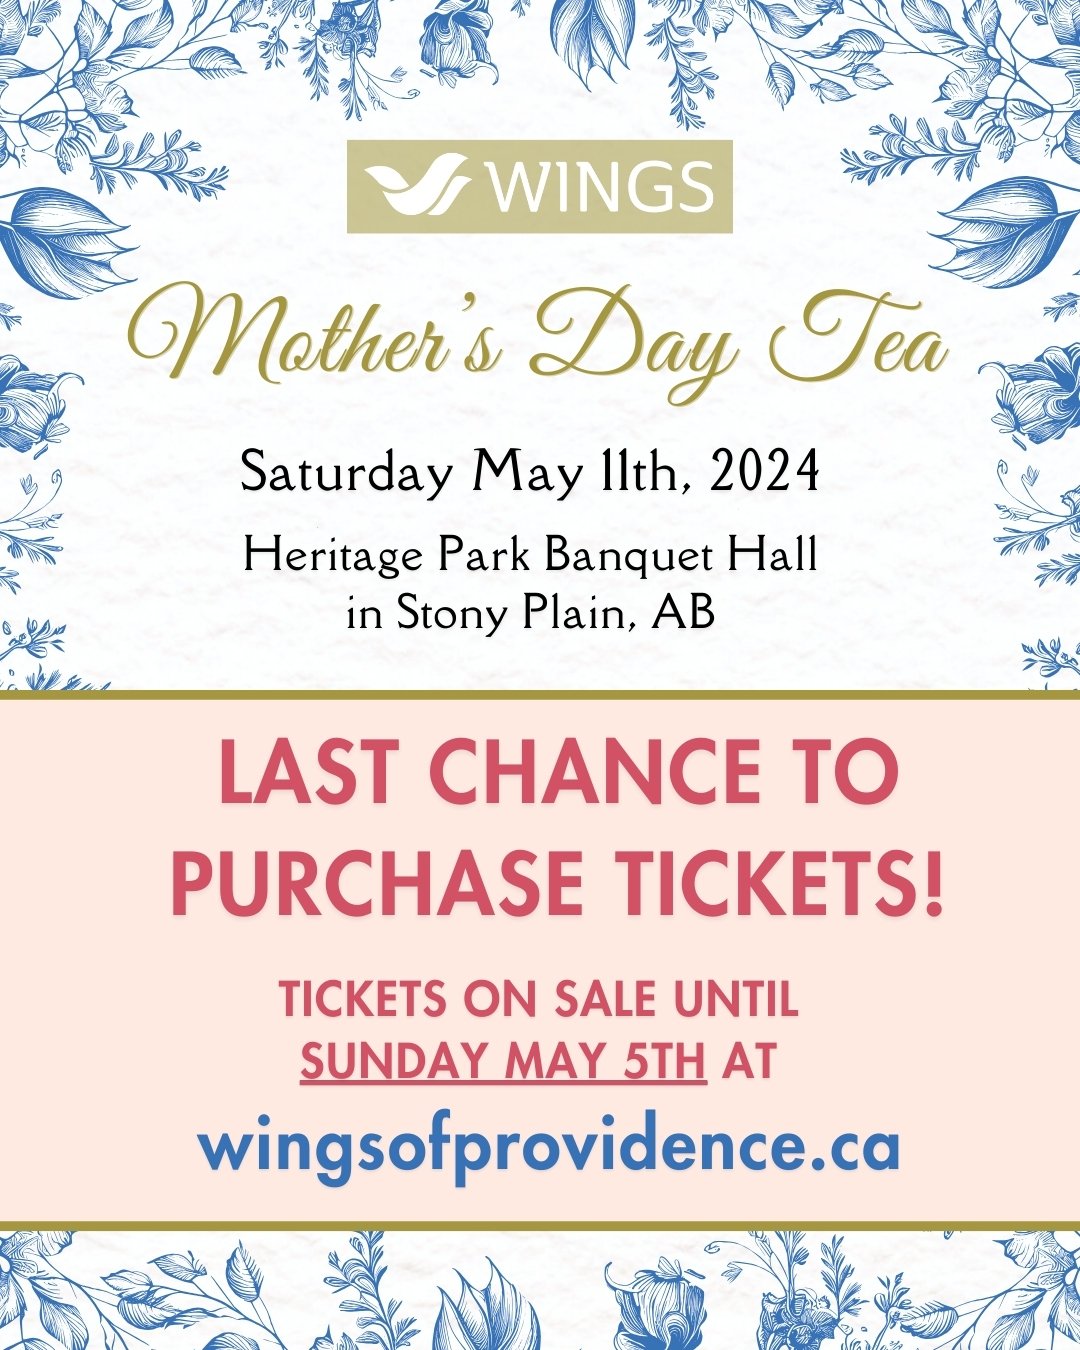 NEARLY SOLD OUT!  TICKETS ON SALE ONLY UNTIL SUNDAY MAY 5TH! Purchase your tickets online at www.wingsofprovidence.ca and don't miss out! 

Join us for afternoon tea and light refreshments in the beautiful banquet hall at Heritage Park in Stony Plain